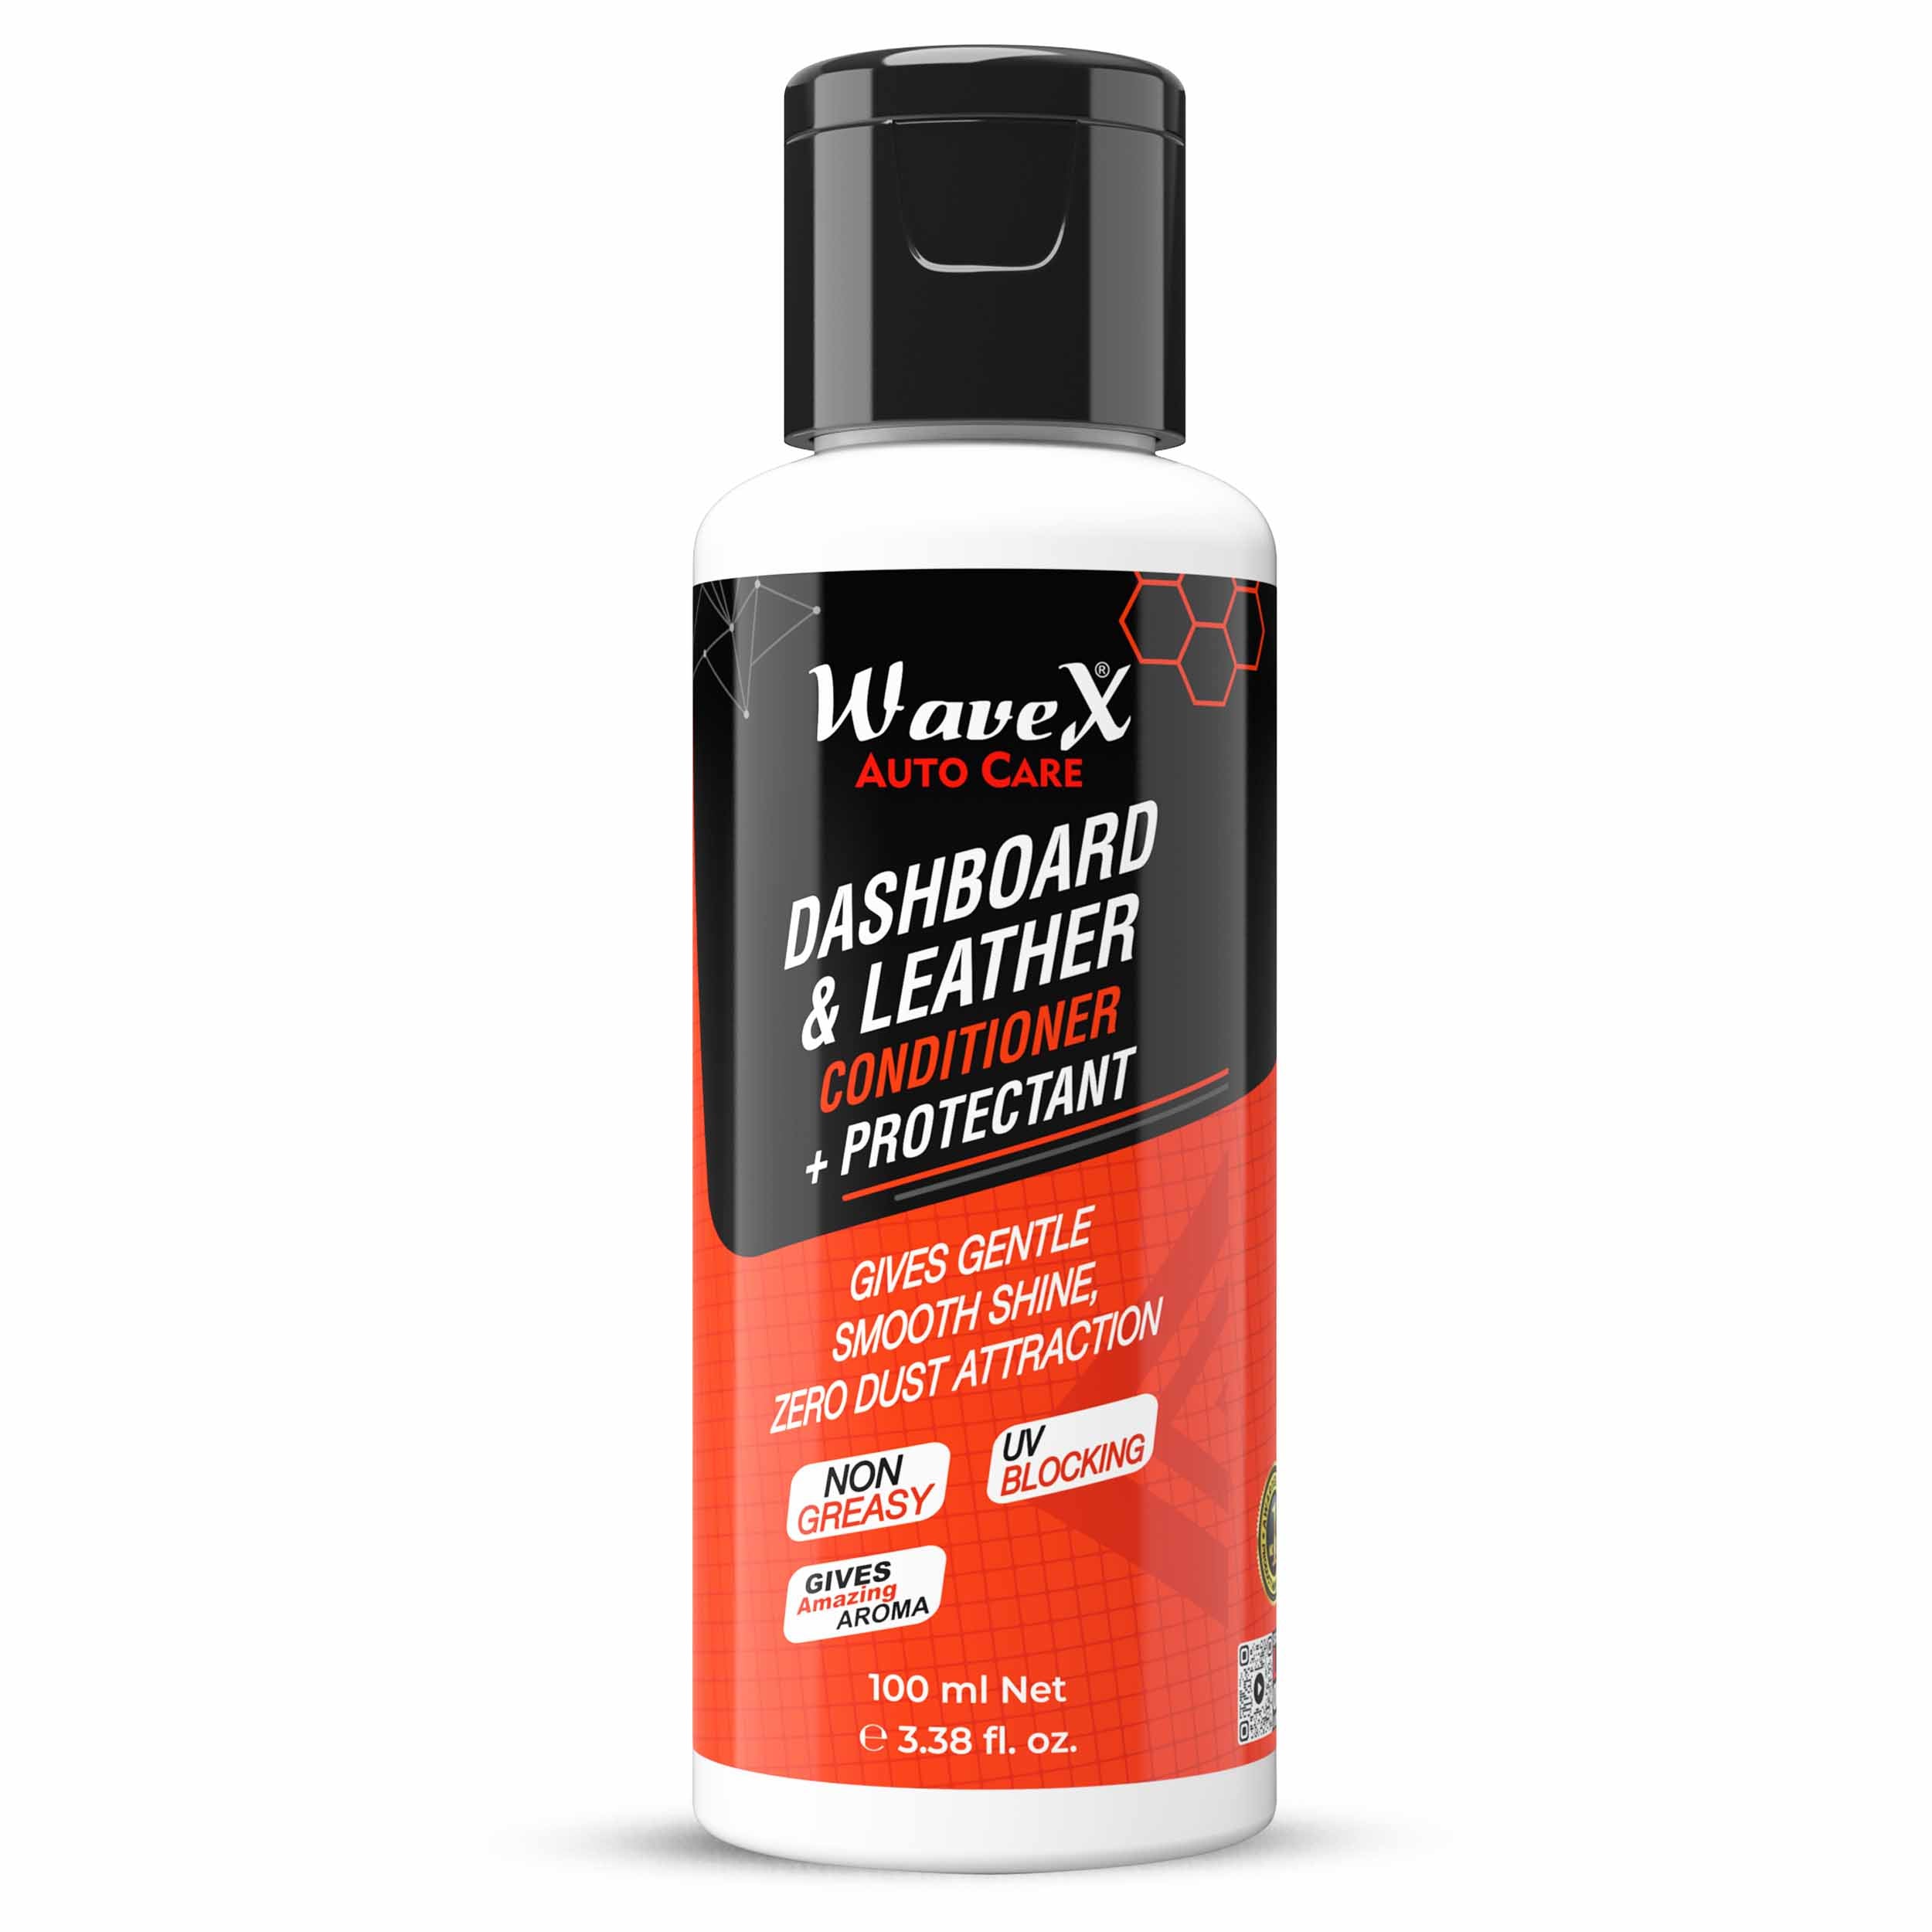 Car Dashboard Polish and Leather Conditioner+Protectant 100ml | Car Interior Cleaner and Shiner